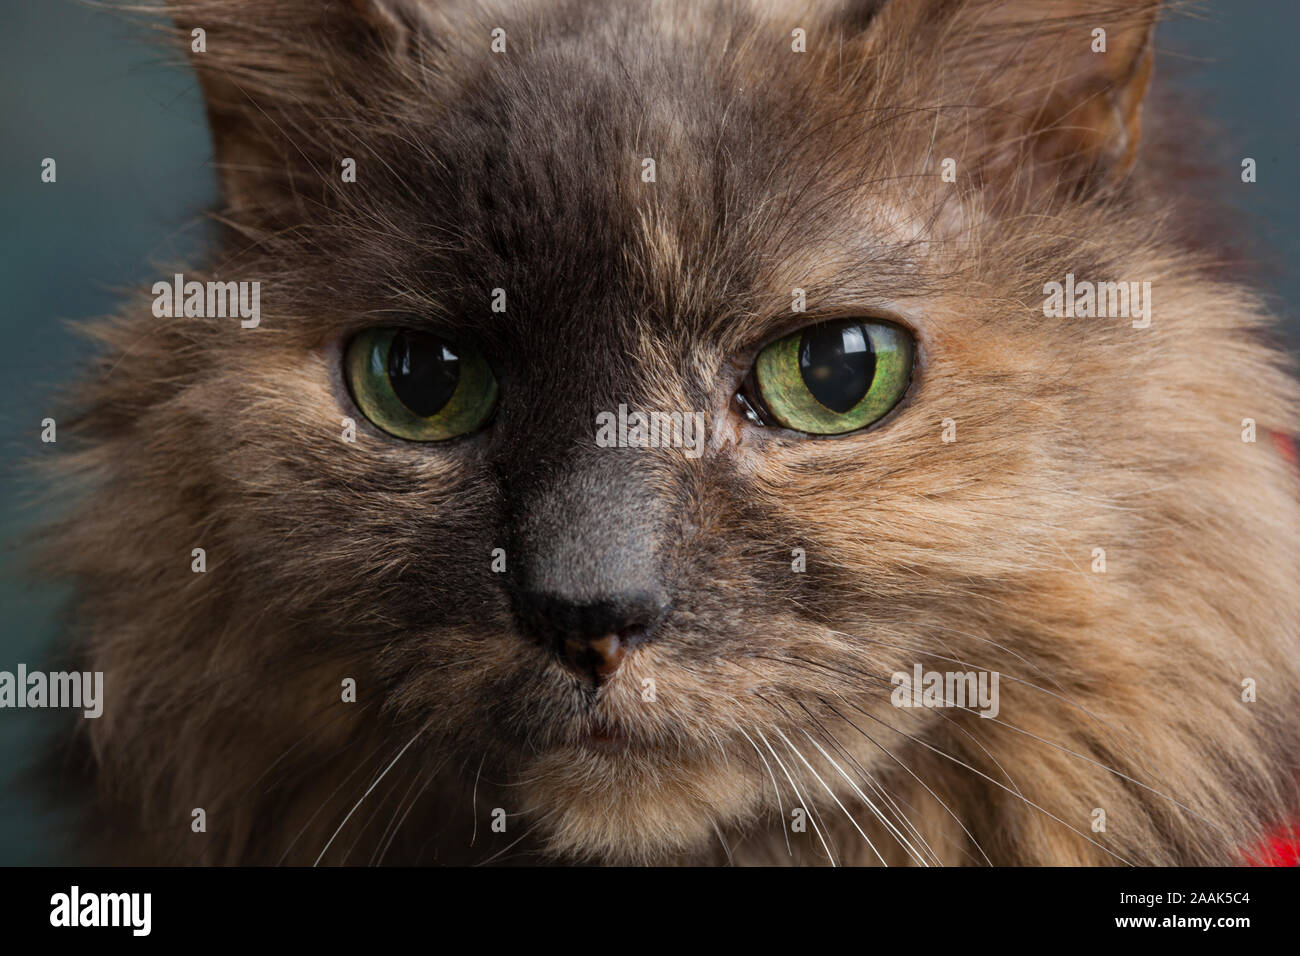 Close-up of Long haired cat Banque D'Images